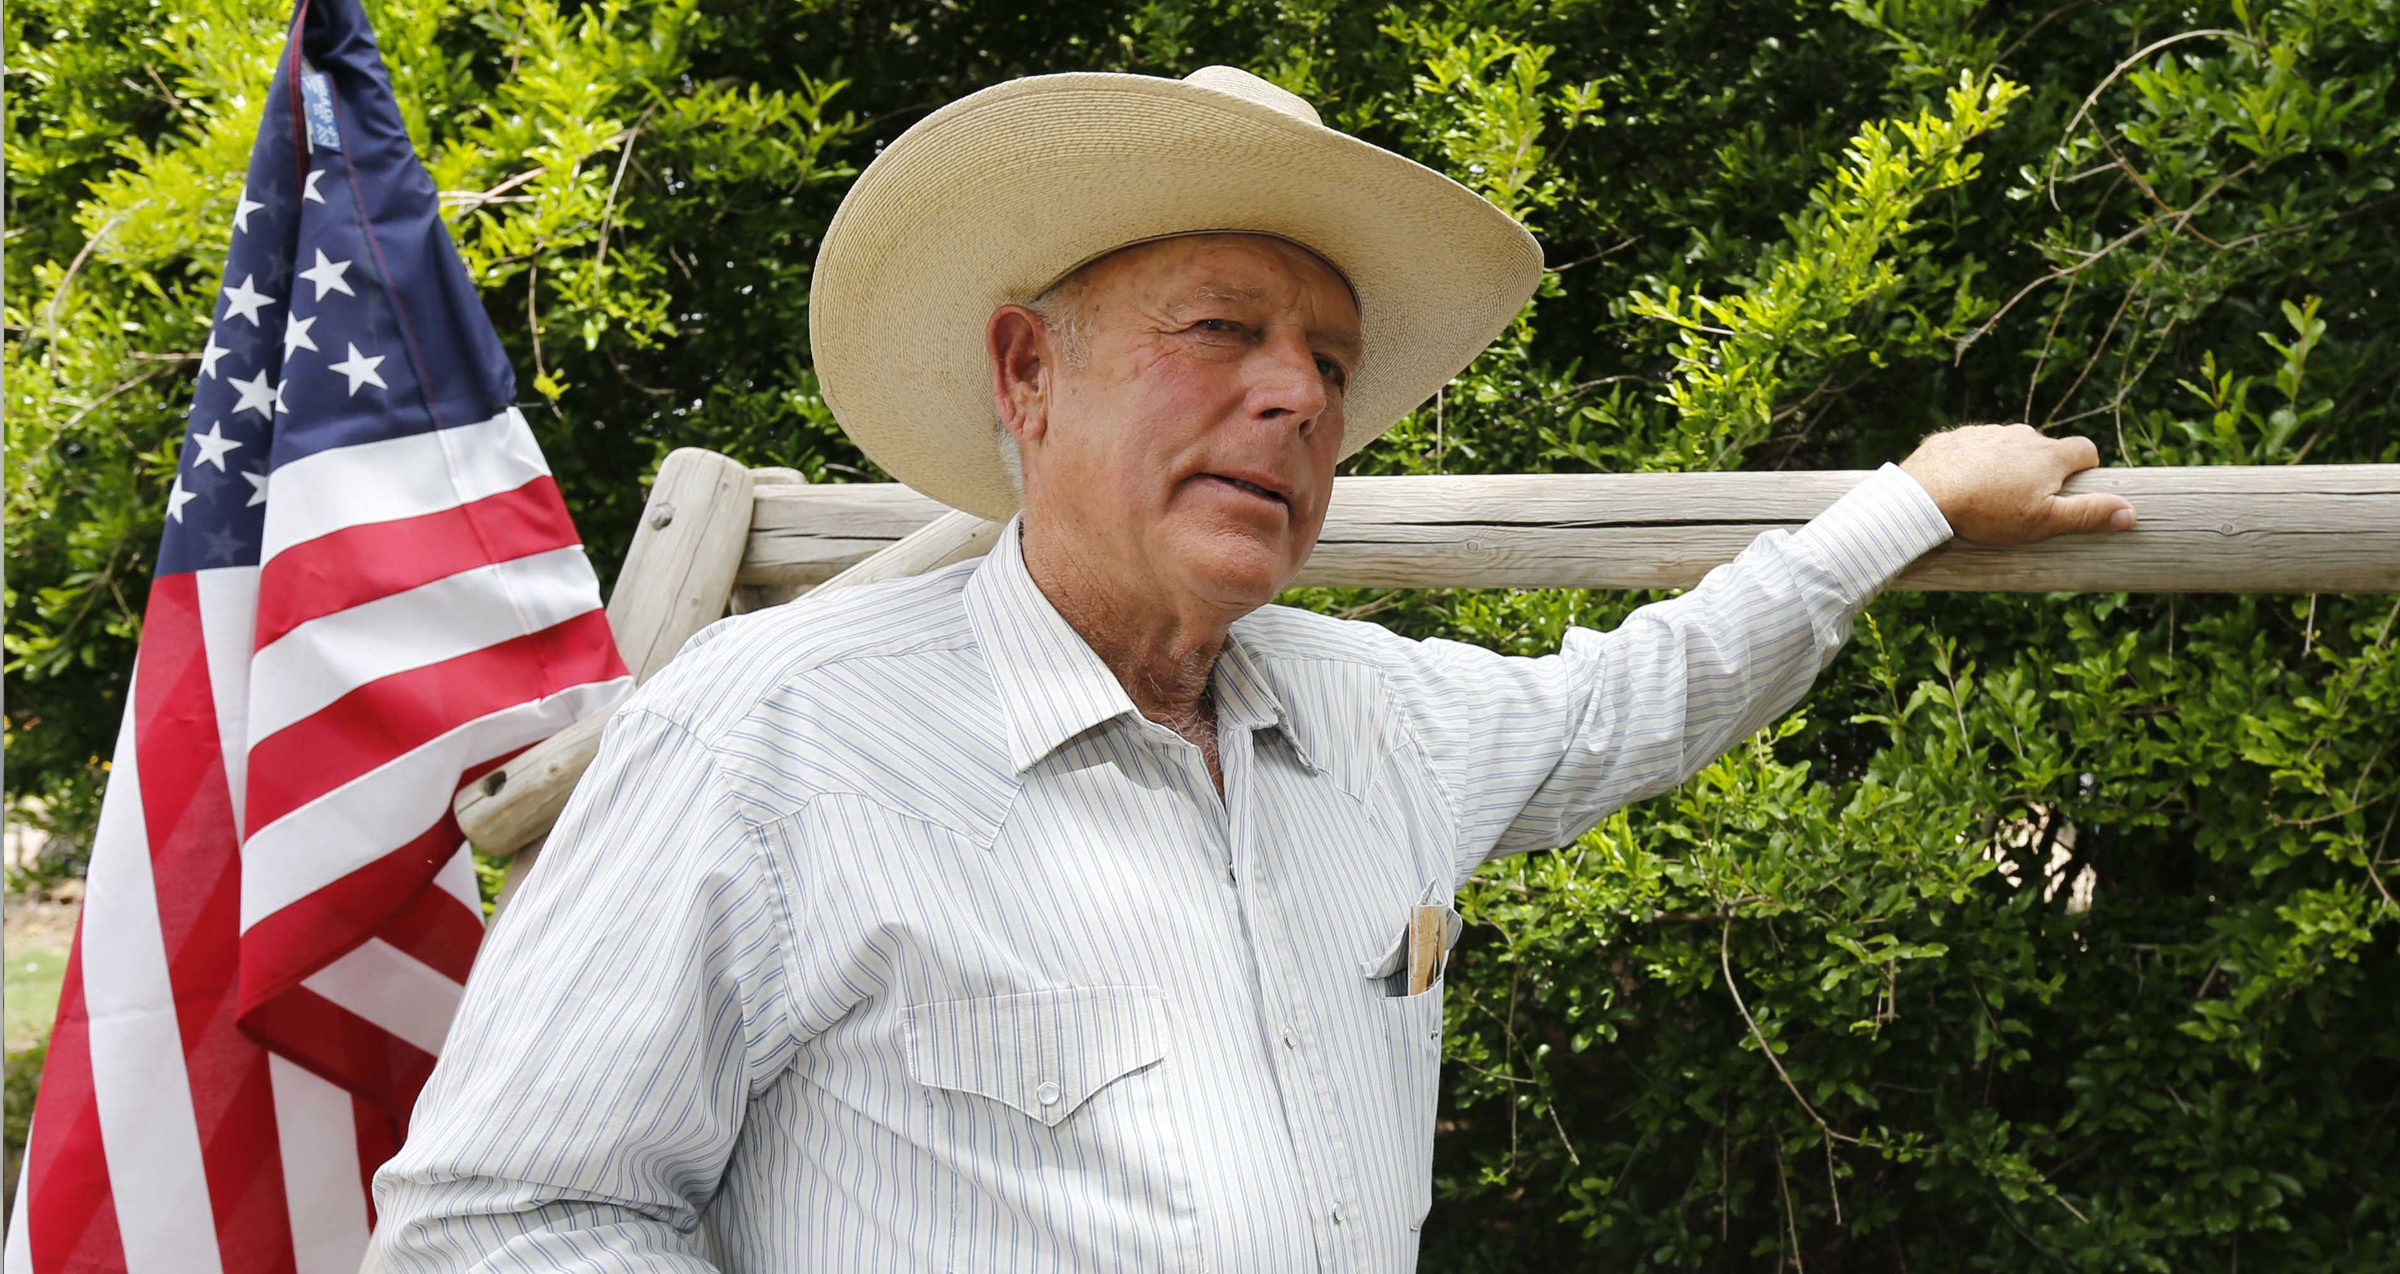 Cliven Bundy’s Psychotic Break With Reality